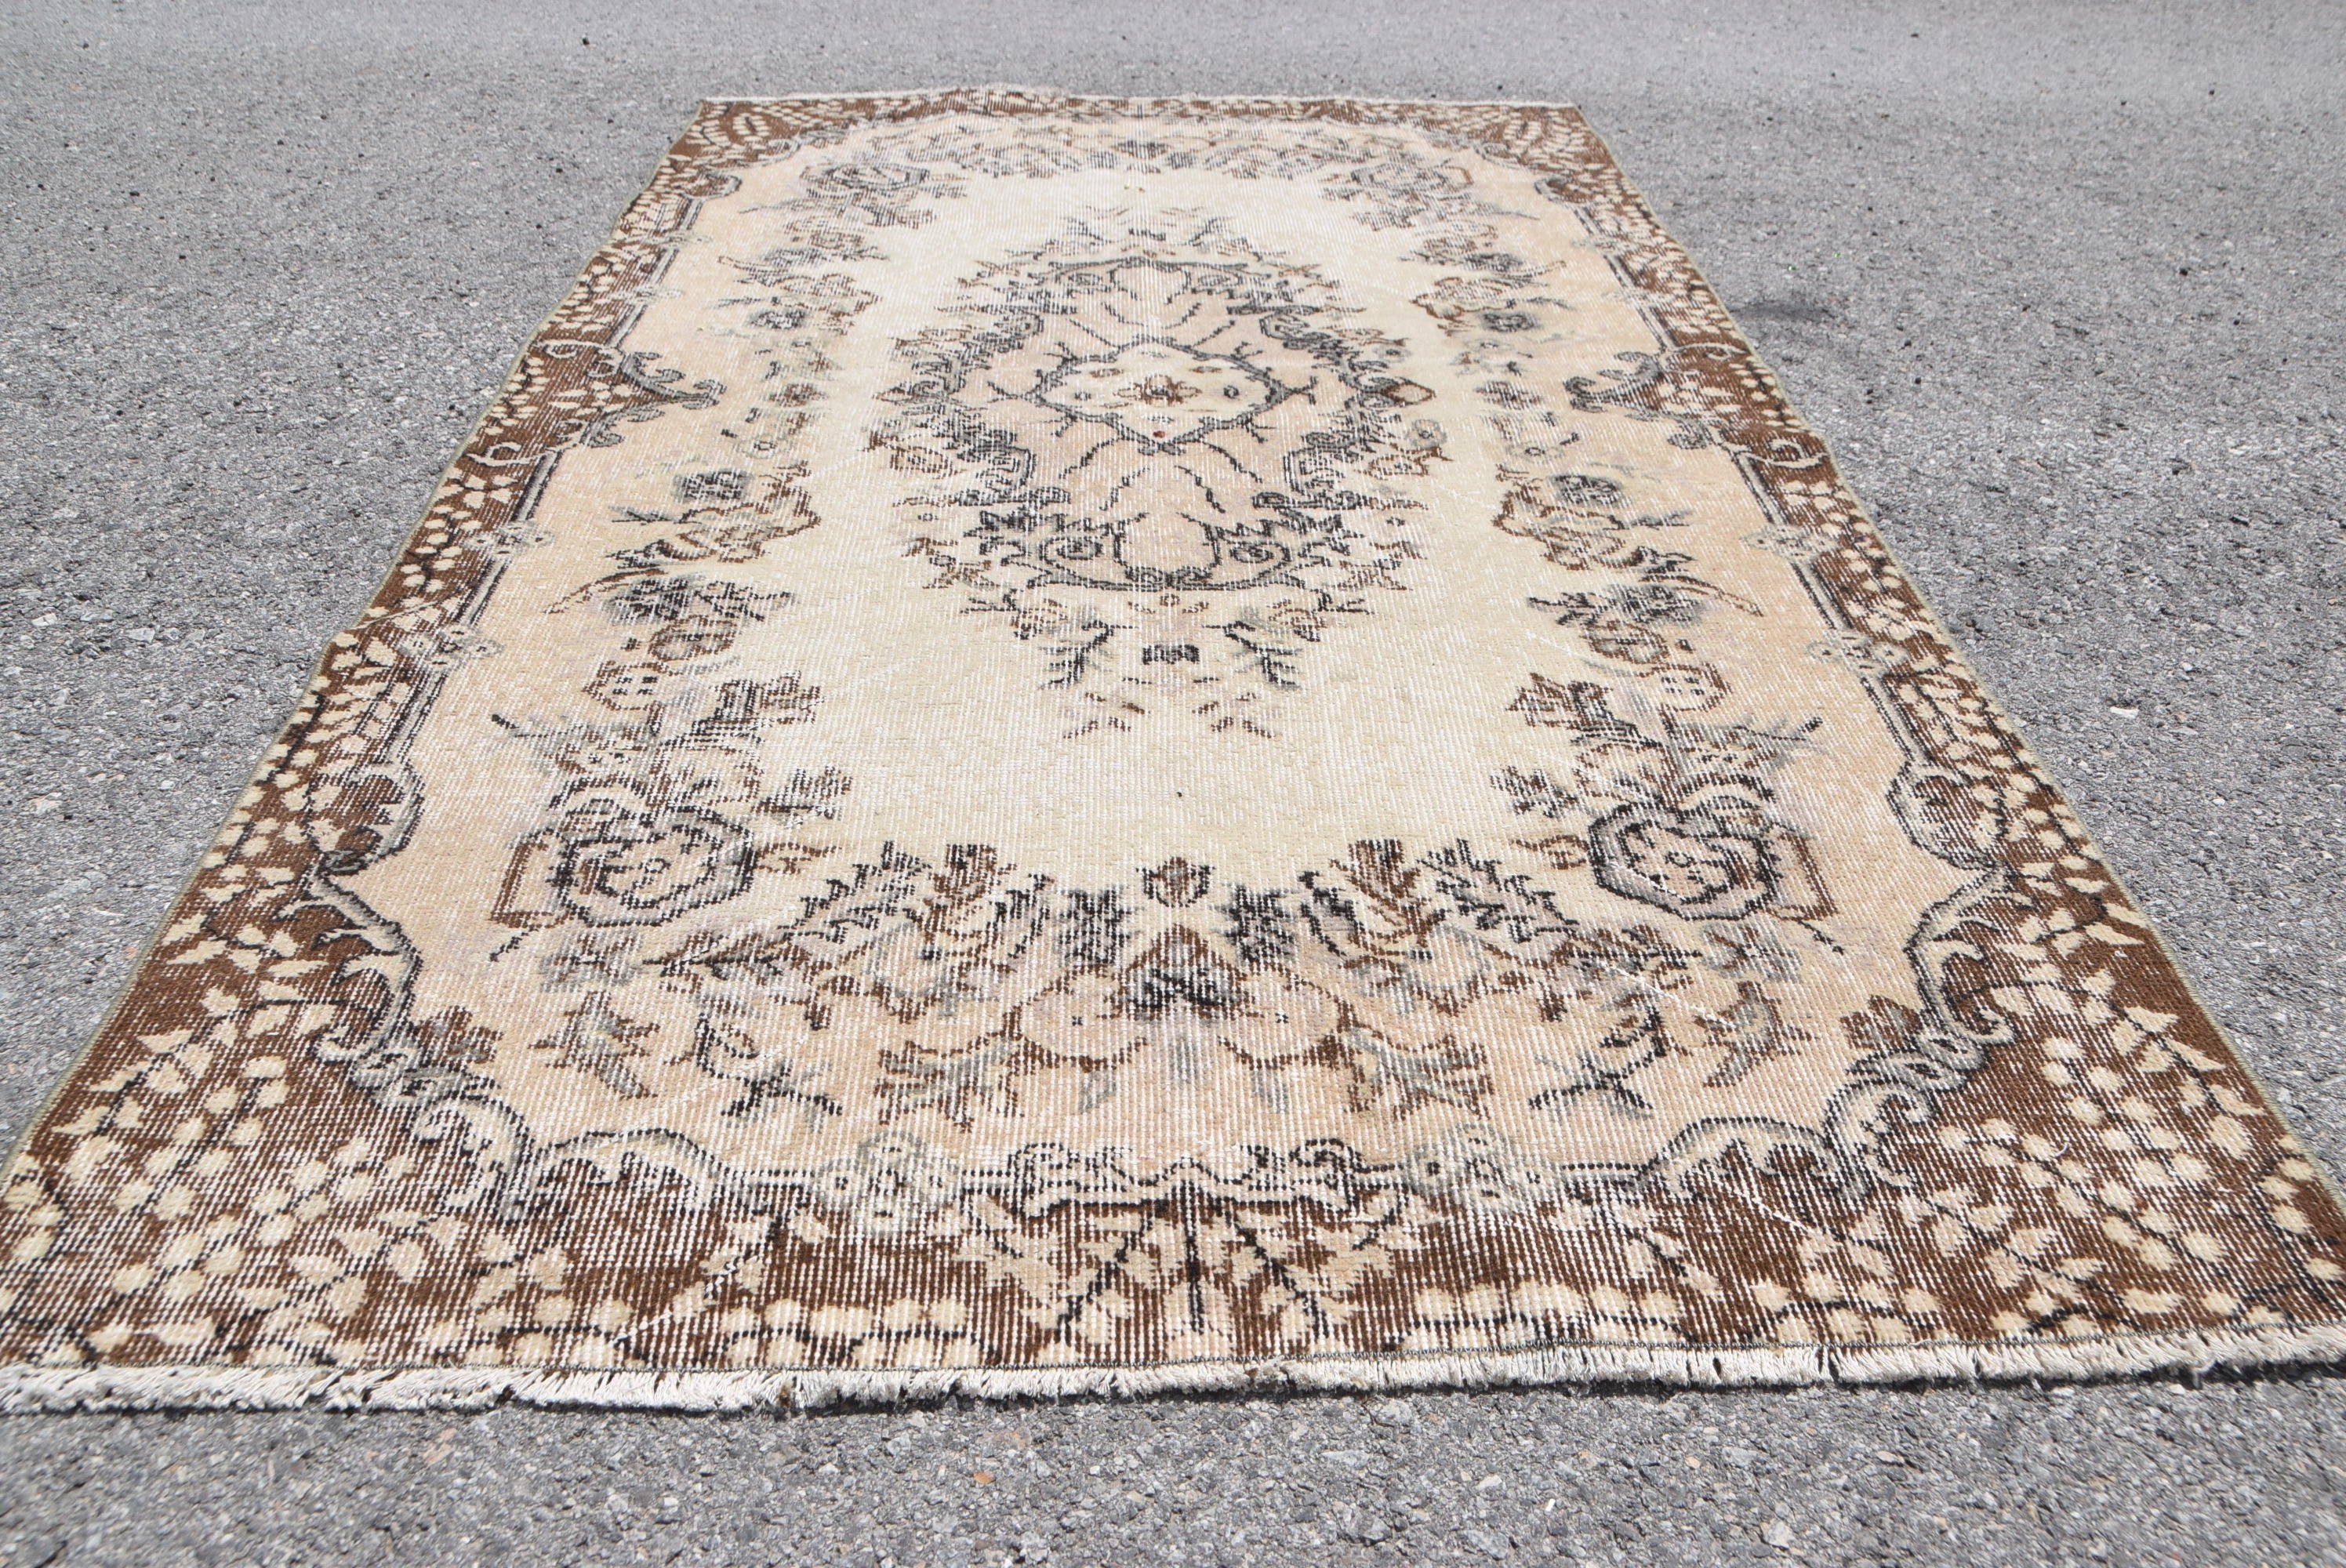 Vintage Rug, Dining Room Rug, Rugs for Area, 3.7x6.7 ft Area Rugs, Antique Rugs, Anatolian Rugs, Beige Kitchen Rug, Turkish Rug, Art Rug